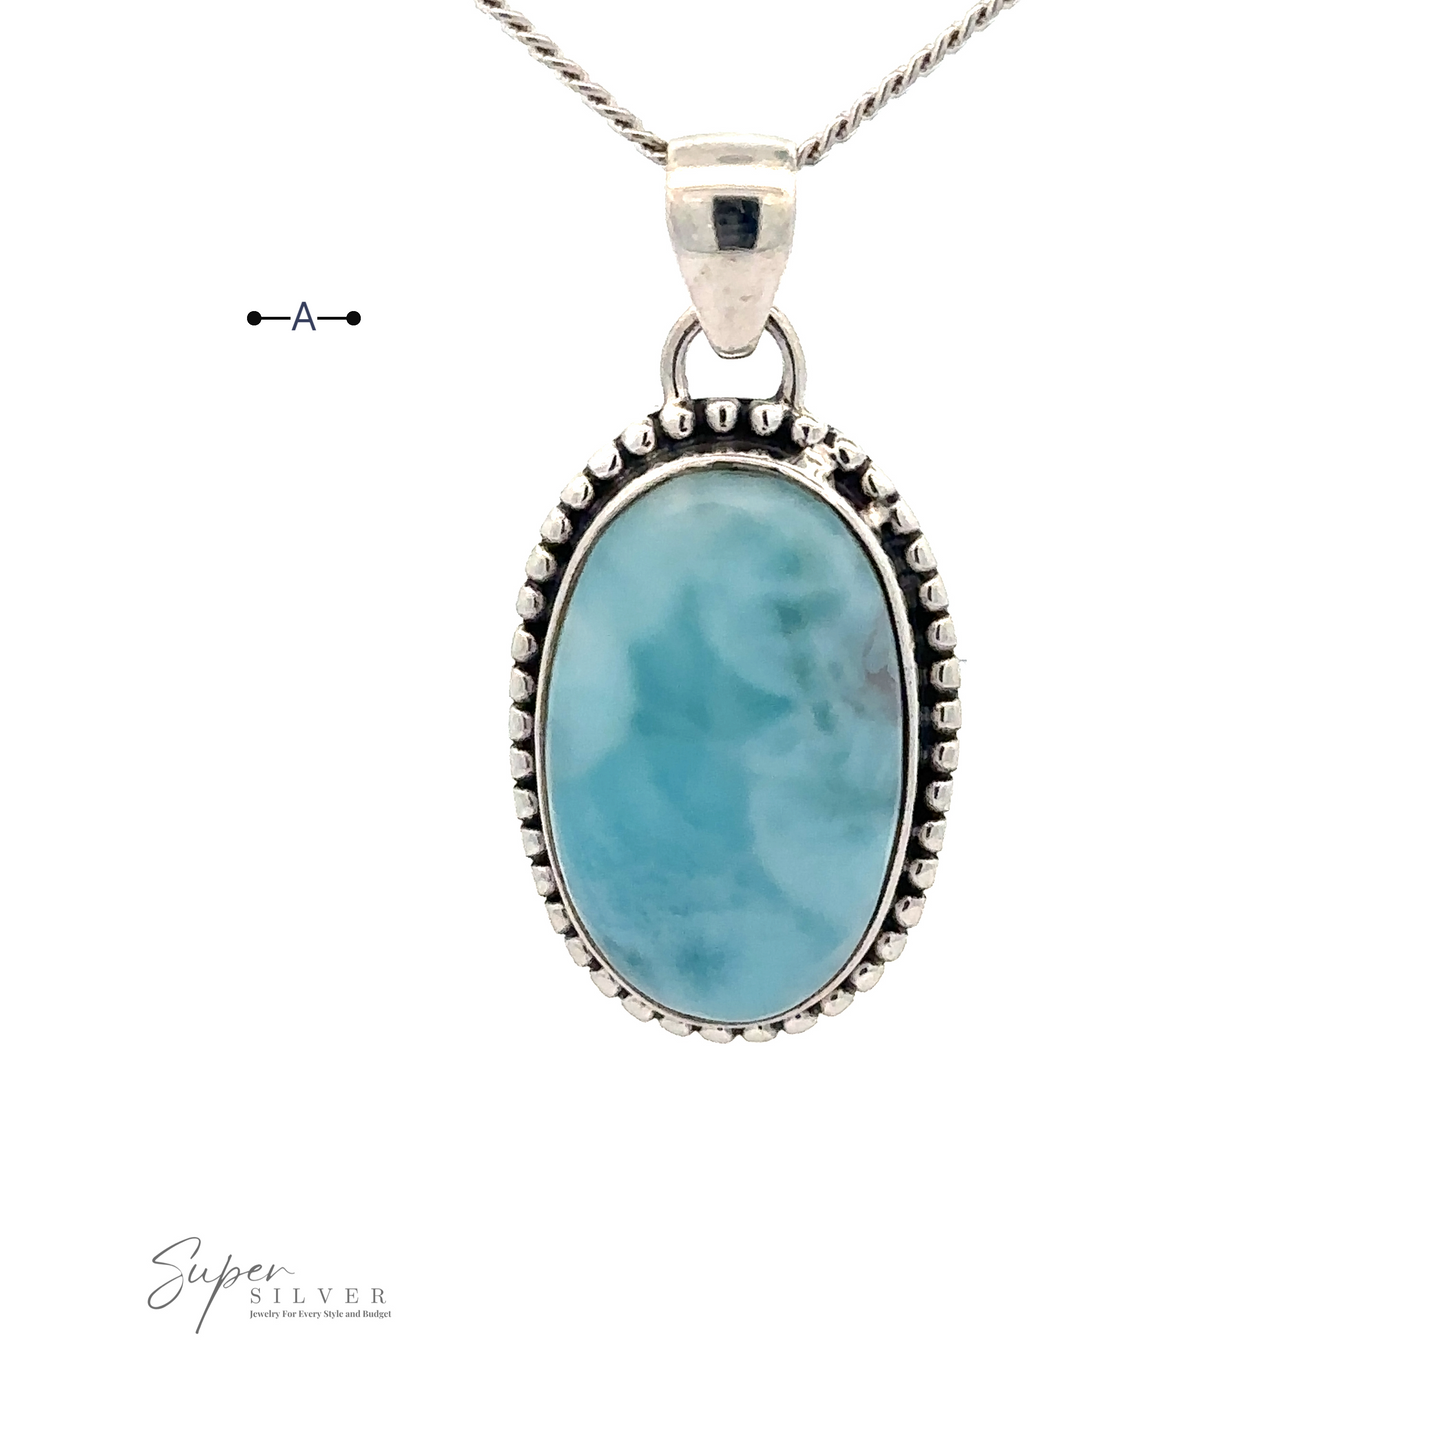 
                  
                    Larimar Oval Pendant with Ball or Rope Border. Small bead-like detailing surrounds the pendant. The background is white, and the text "Super Silver" appears in the bottom left corner.
                  
                